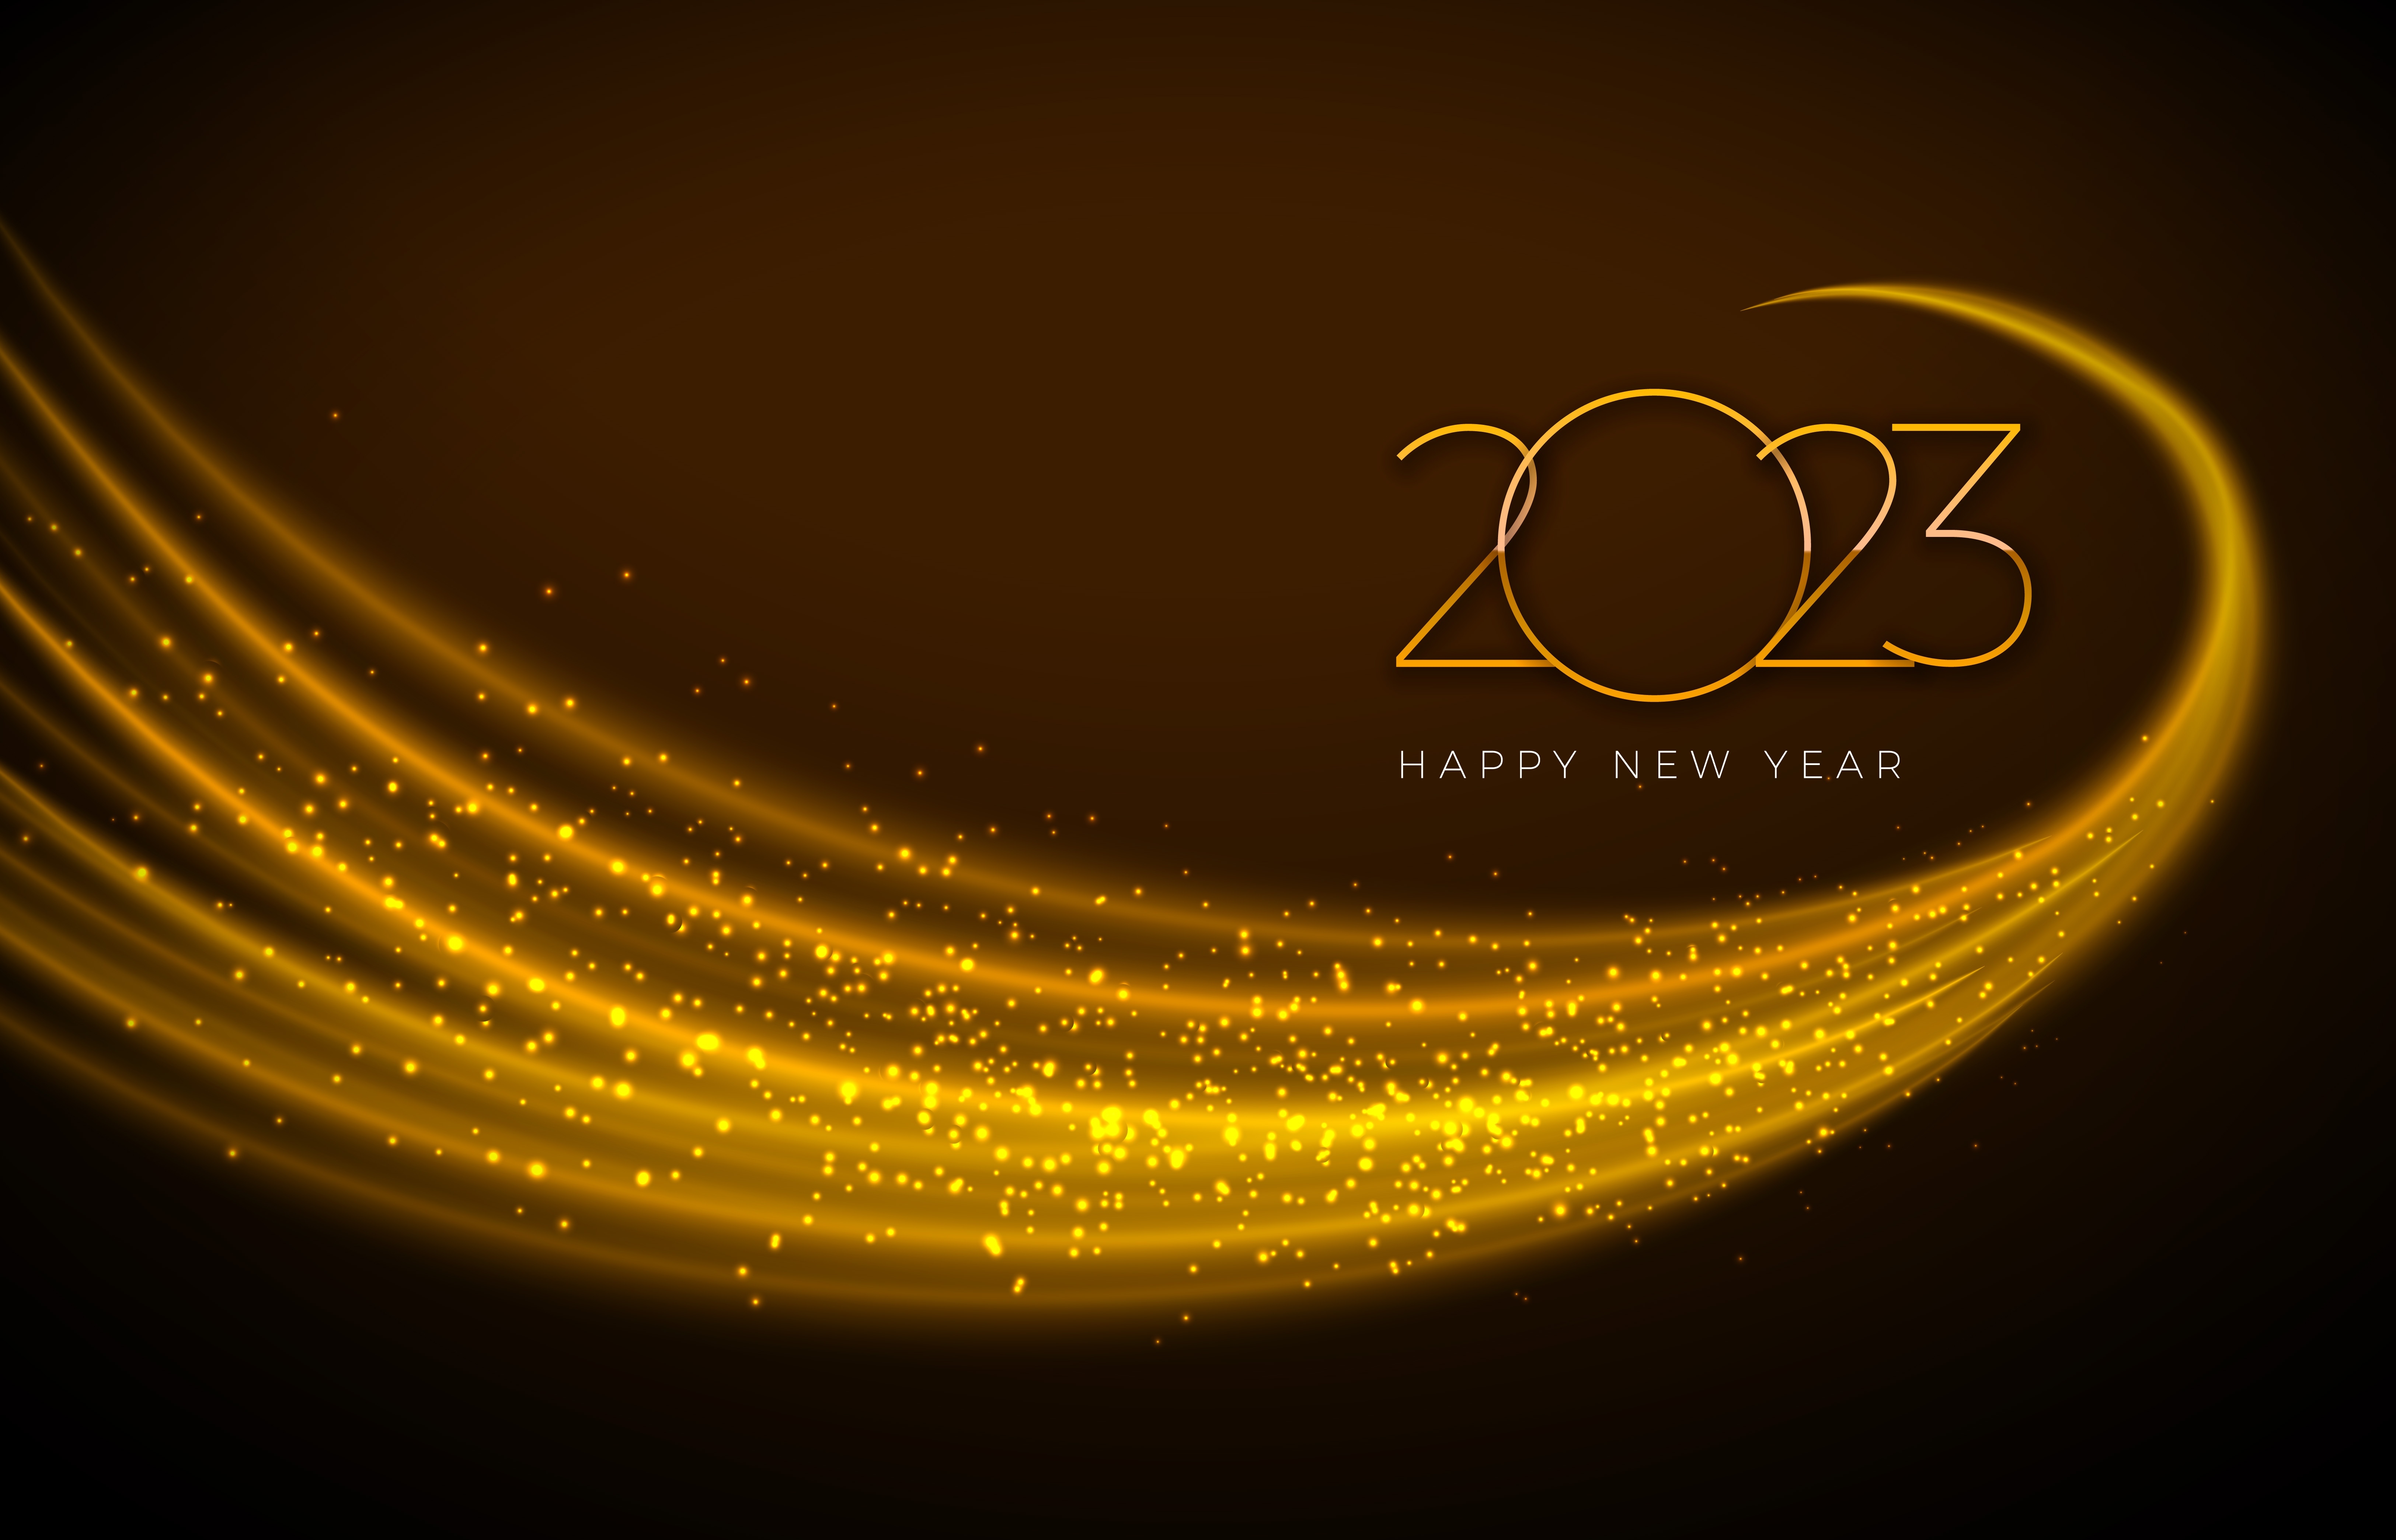 New Year 2023 4k Digital Wallpaper, HD Holidays 4K Wallpapers, Images,  Photos and Background - Wallpapers Den